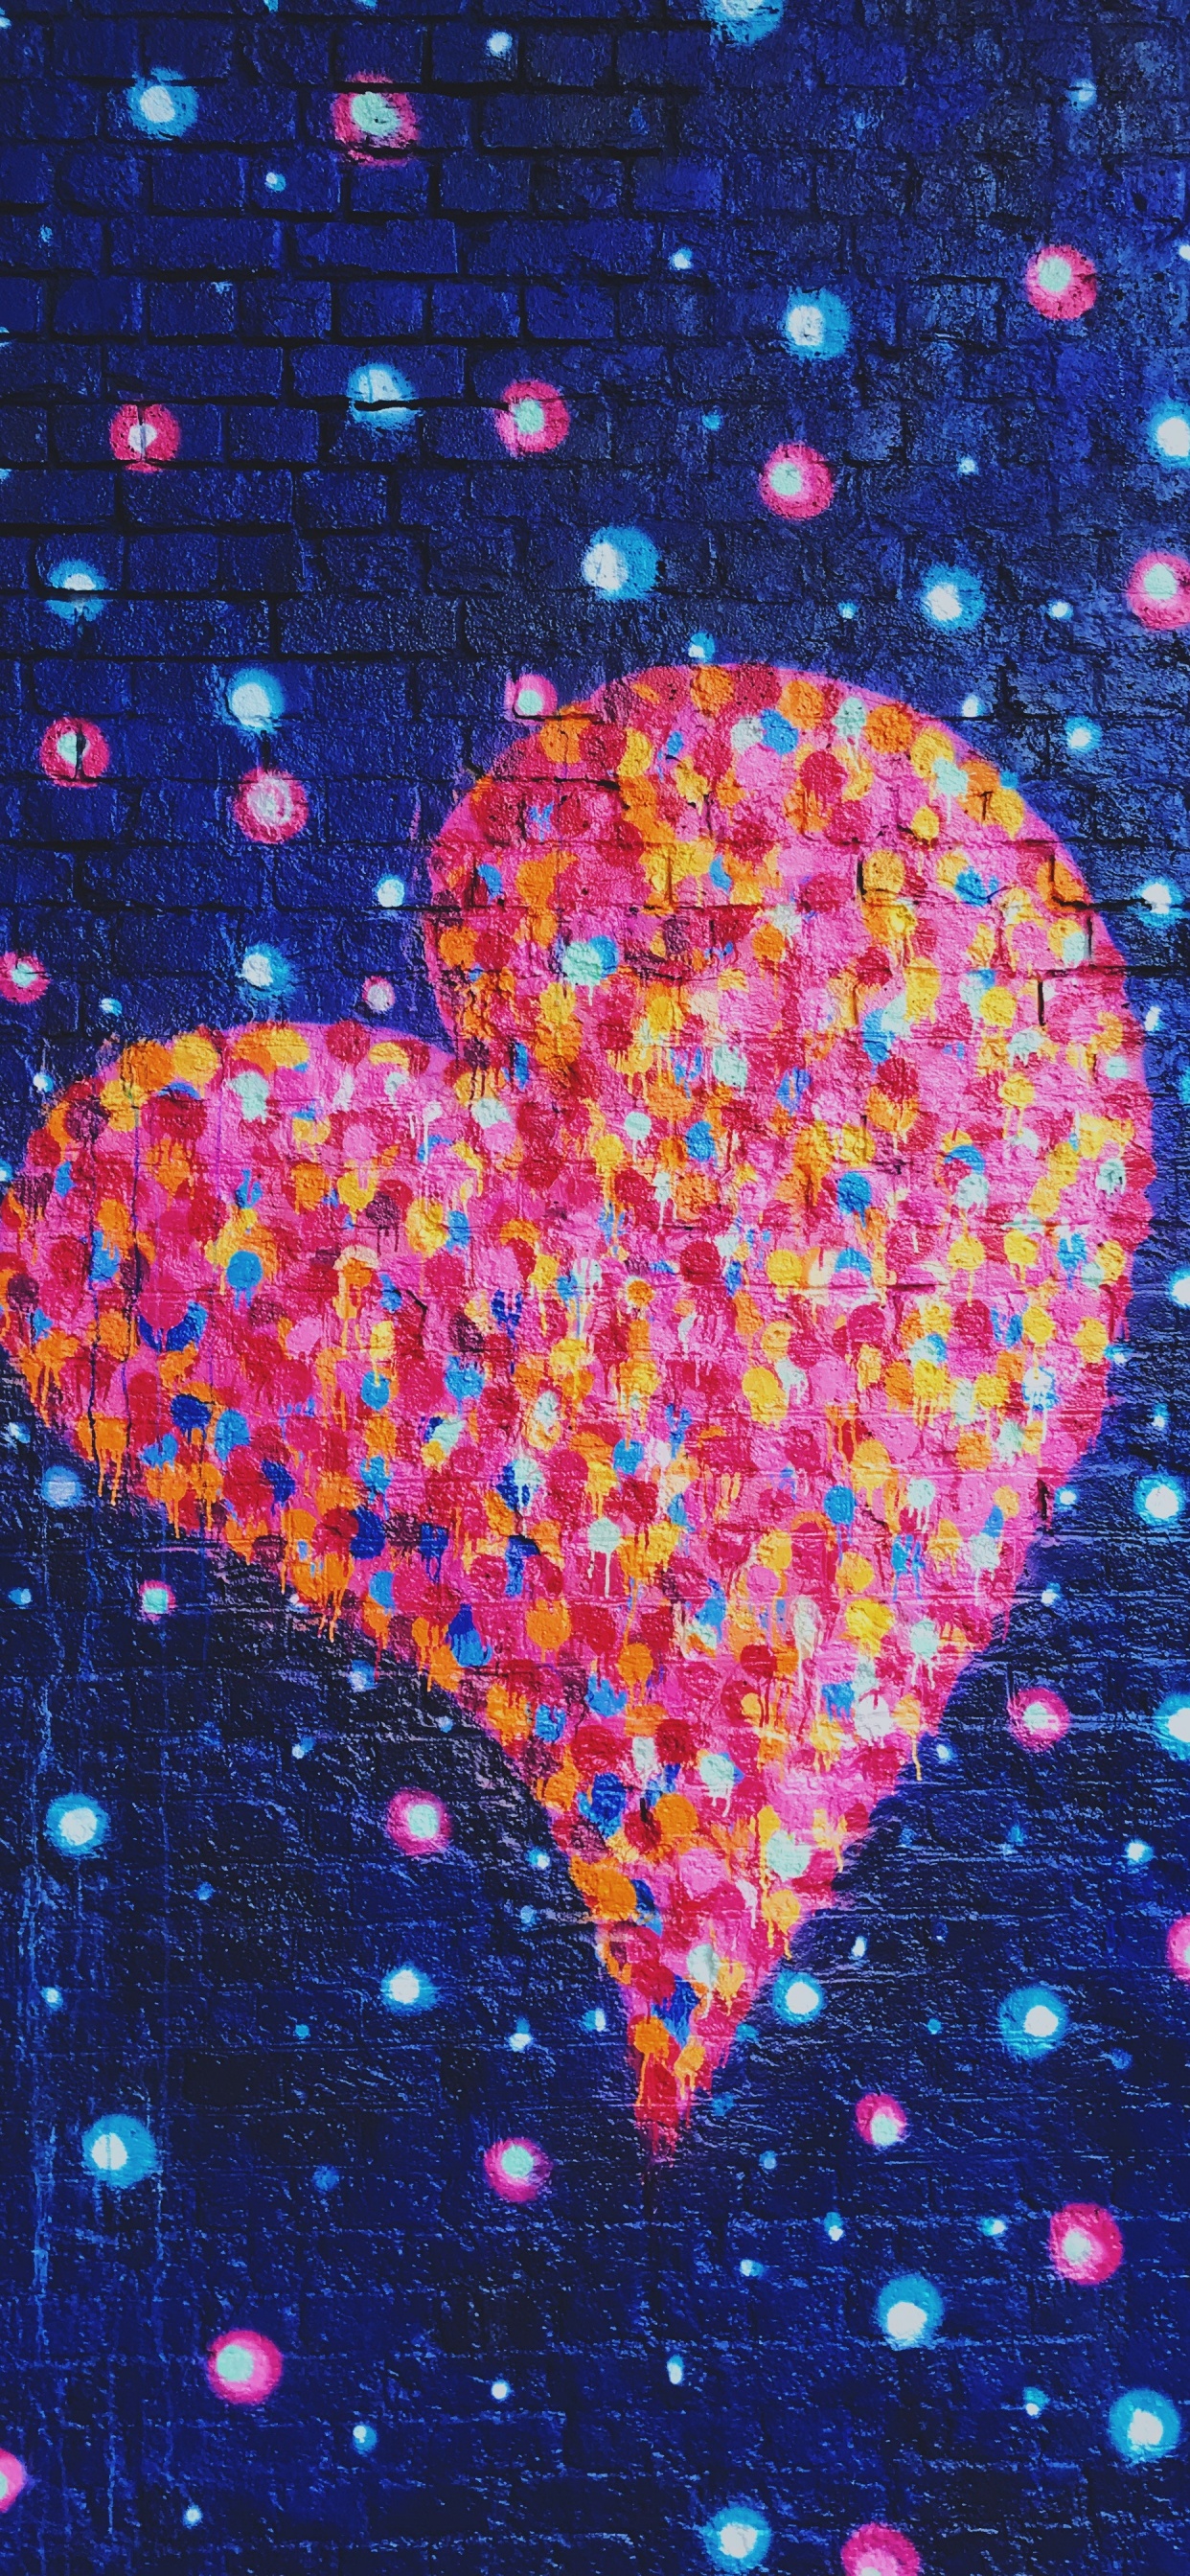 Red Heart With Blue and Pink Hearts Illustration. Wallpaper in 1242x2688 Resolution